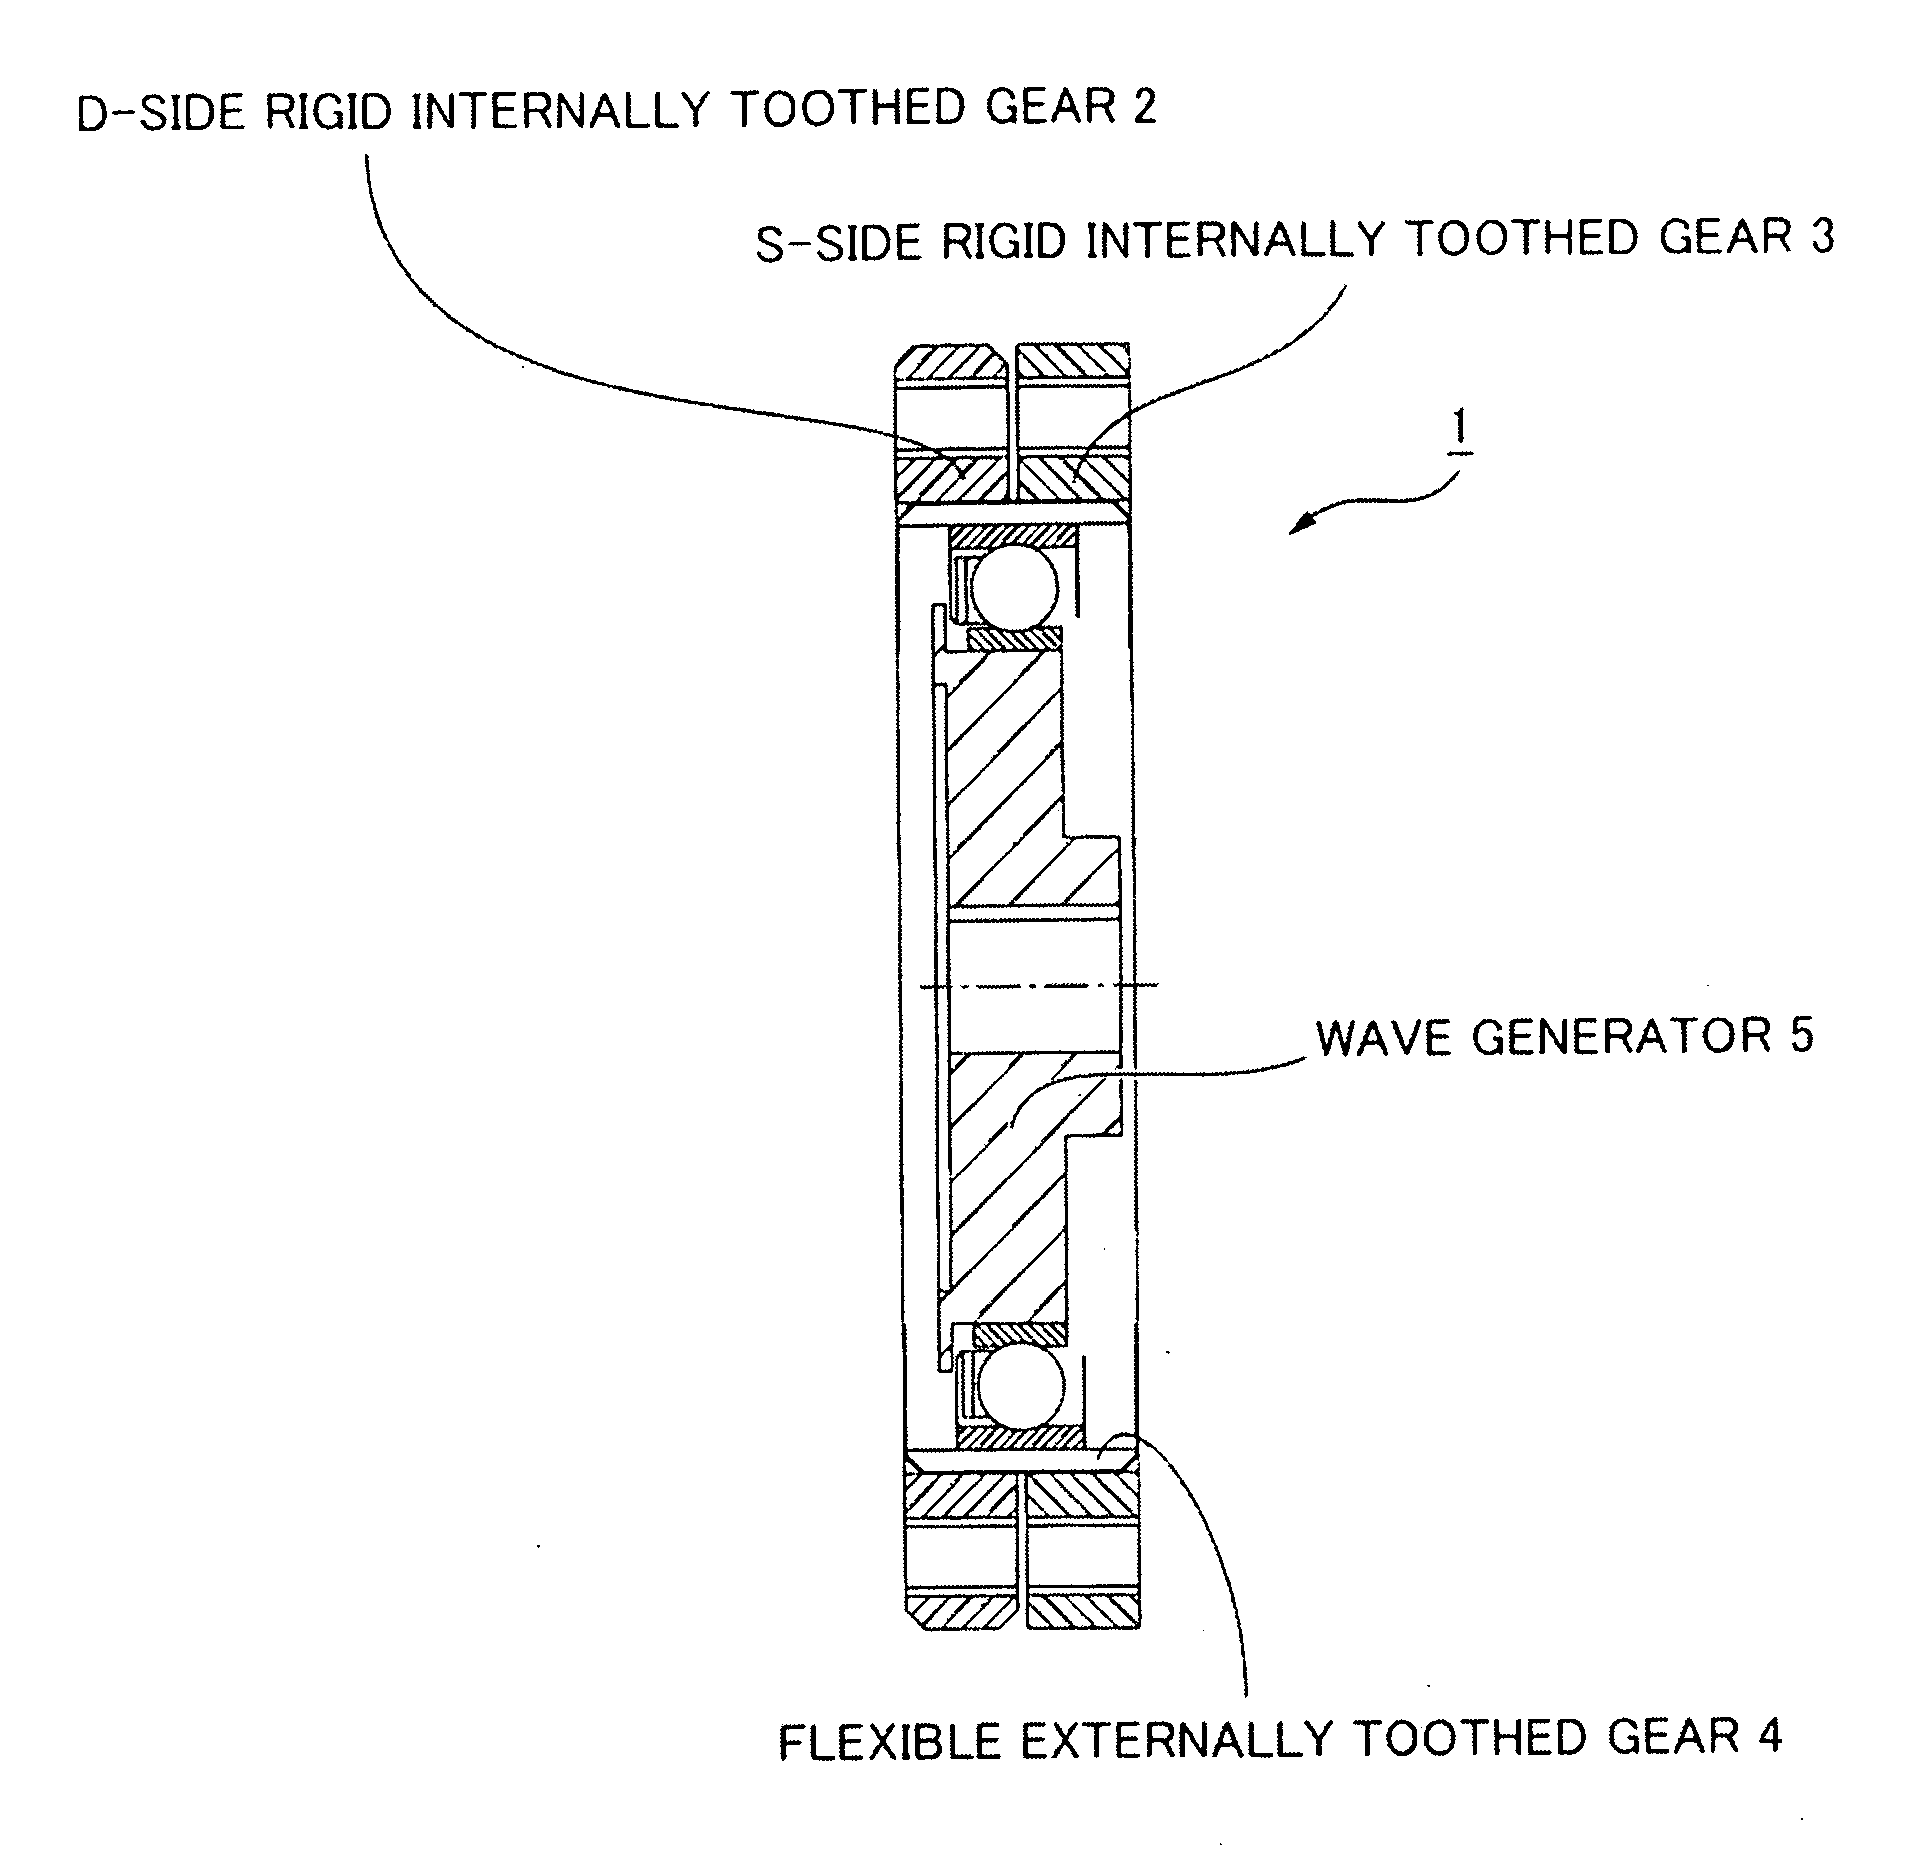 Method For Setting Gear Tooth Profile In Flat Wave Gear Device On Side Where Gears Have Same Number Of teeth